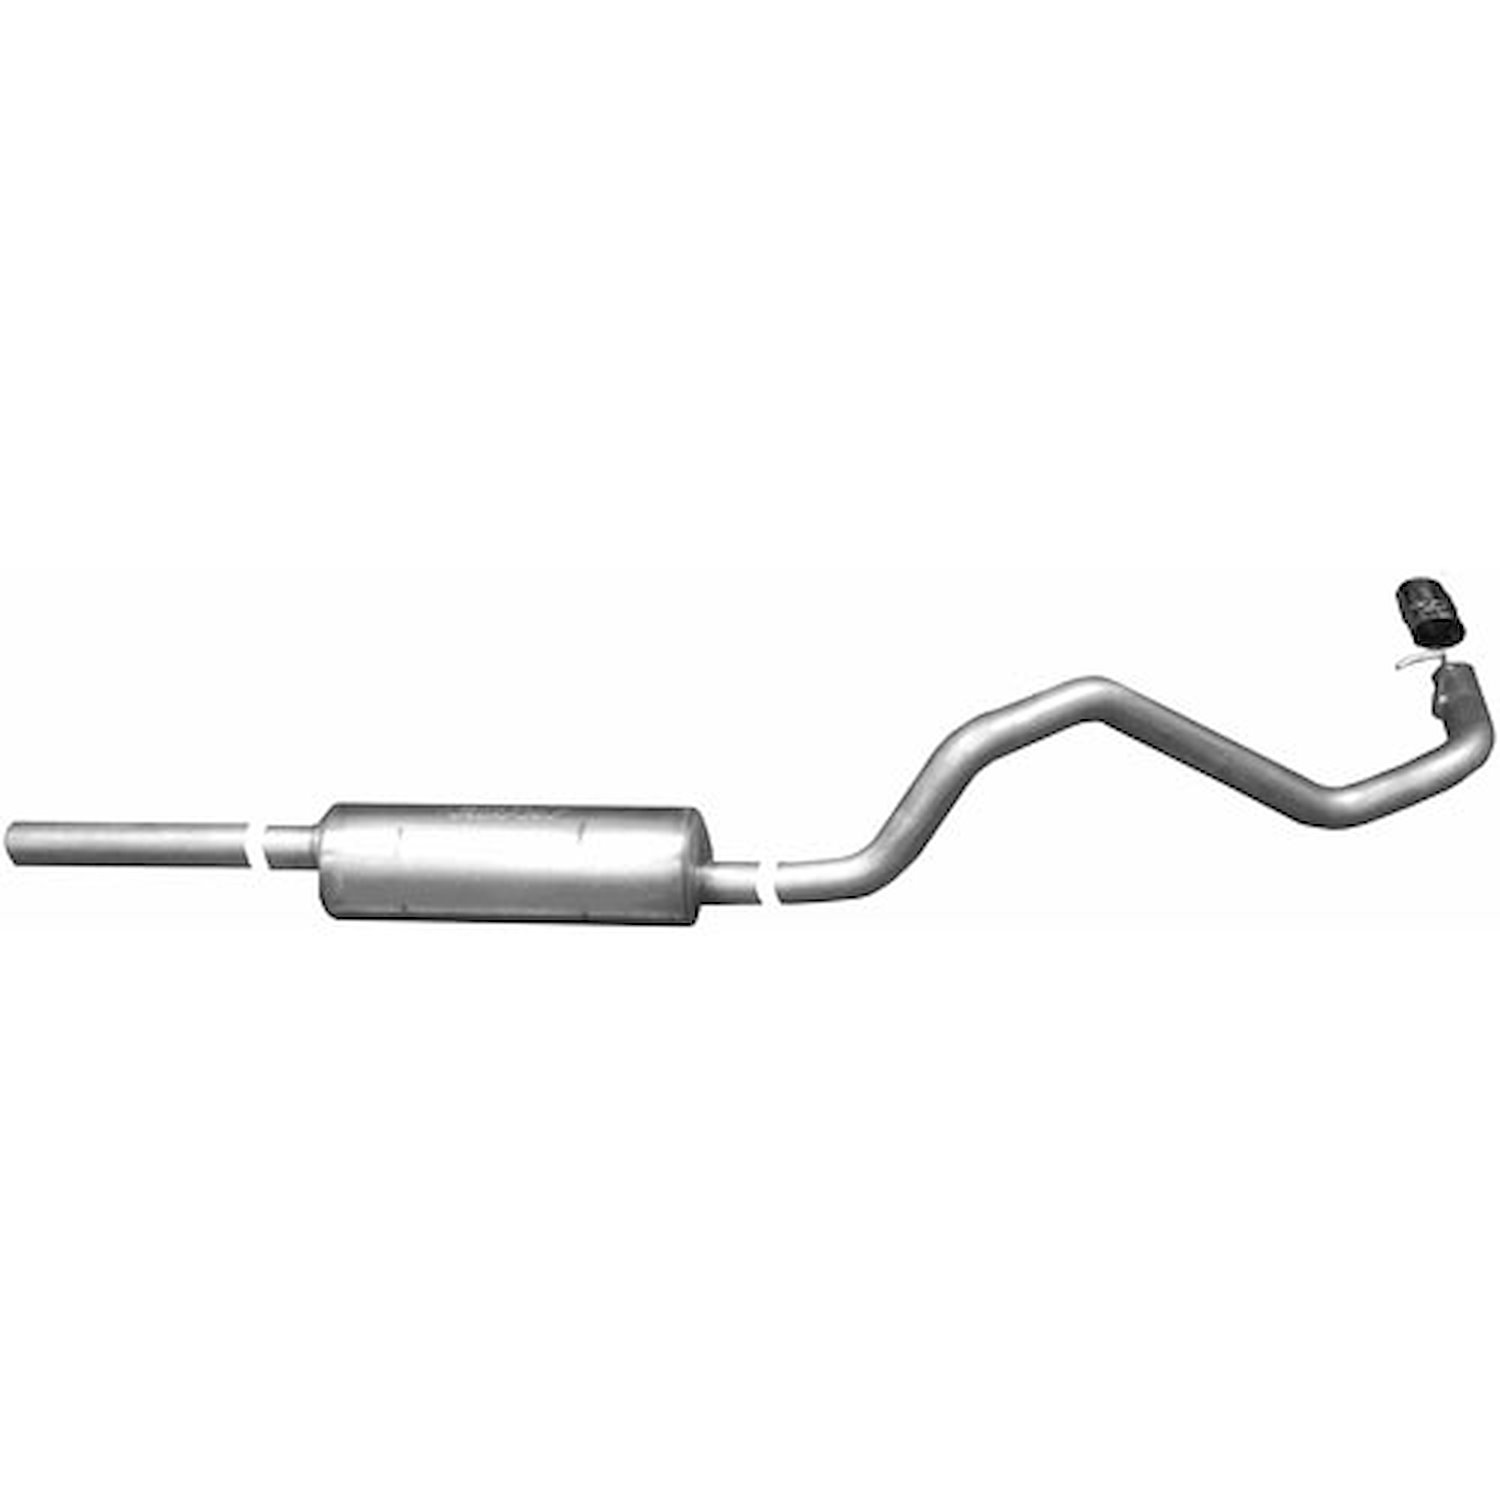 Swept-Side Cat-Back Exhaust 1998-2000 Toyota Tacoma TRD 3.4L